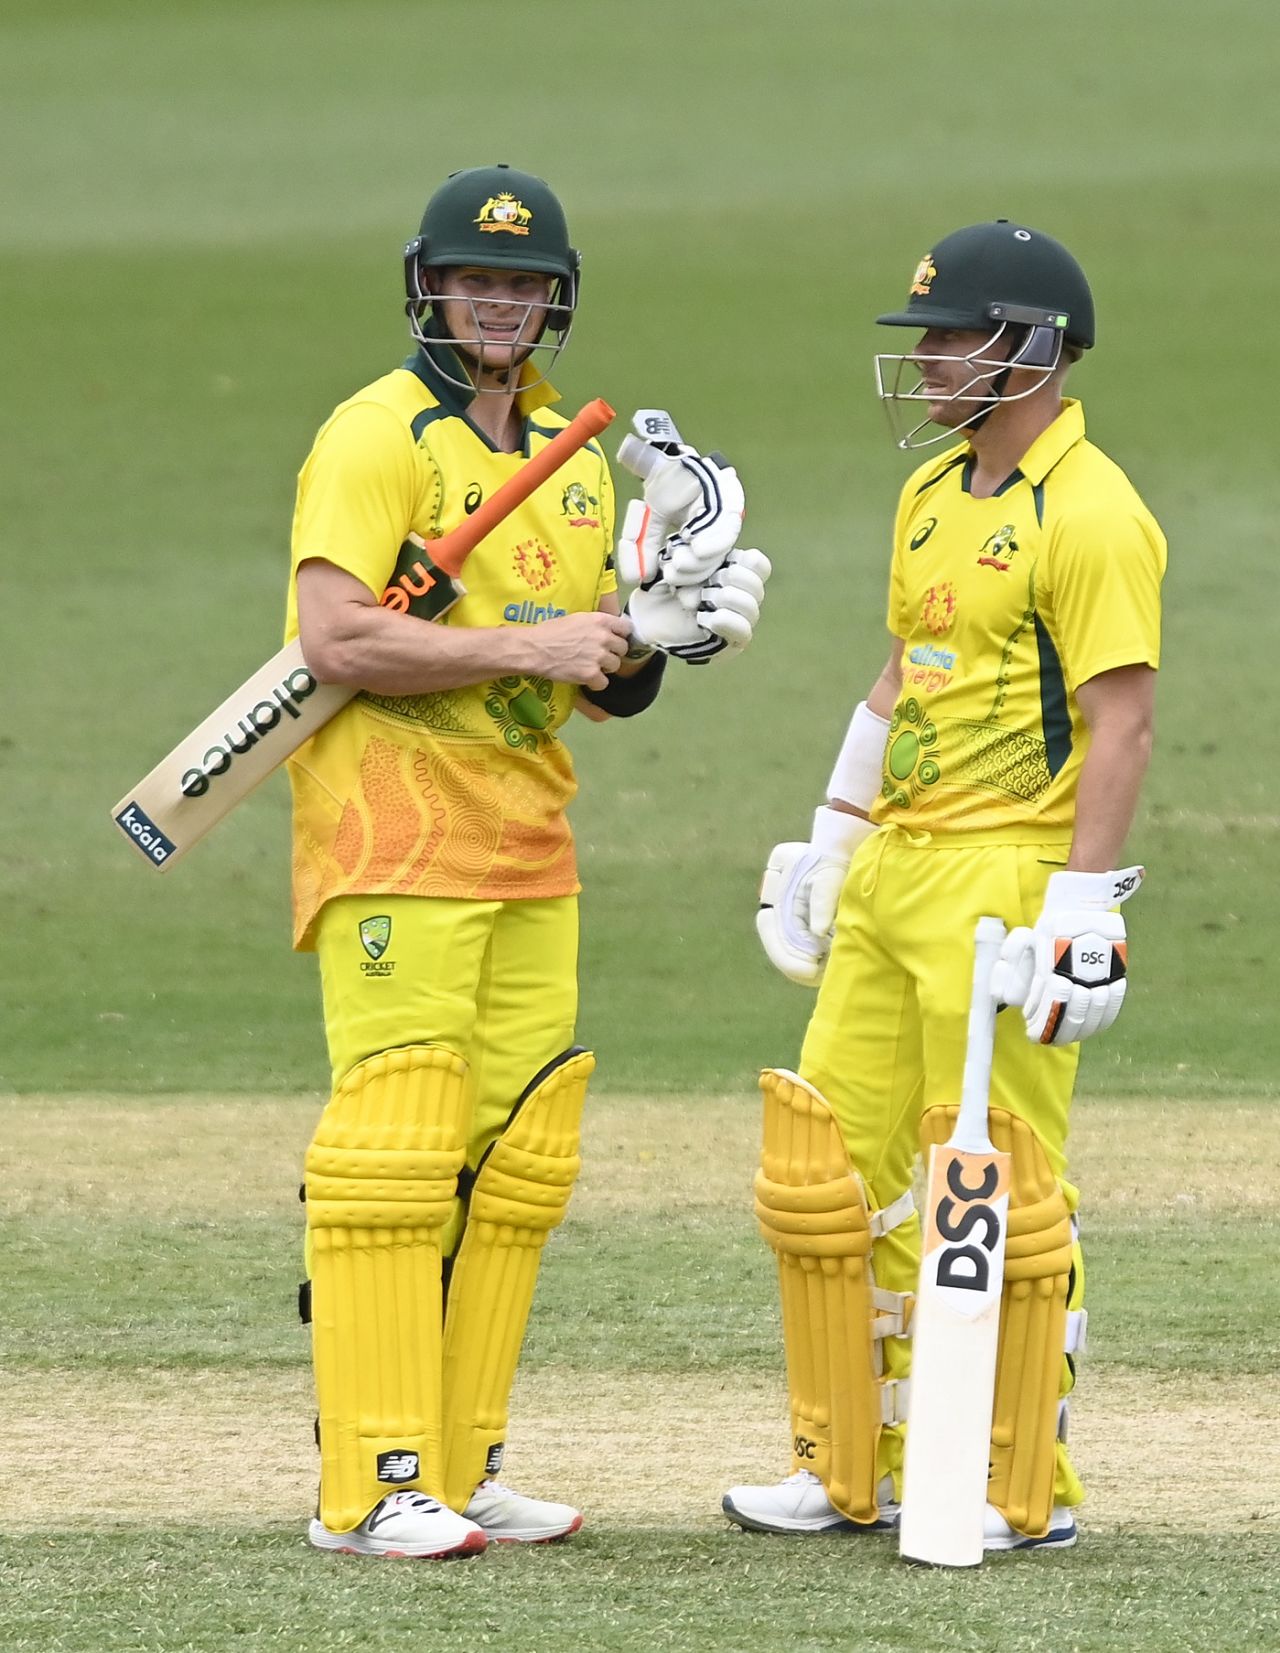 Steven Smith and David Warner in the middle, Australia vs Zimbabwe, 1st ODI, Townsville, August 28, 2022